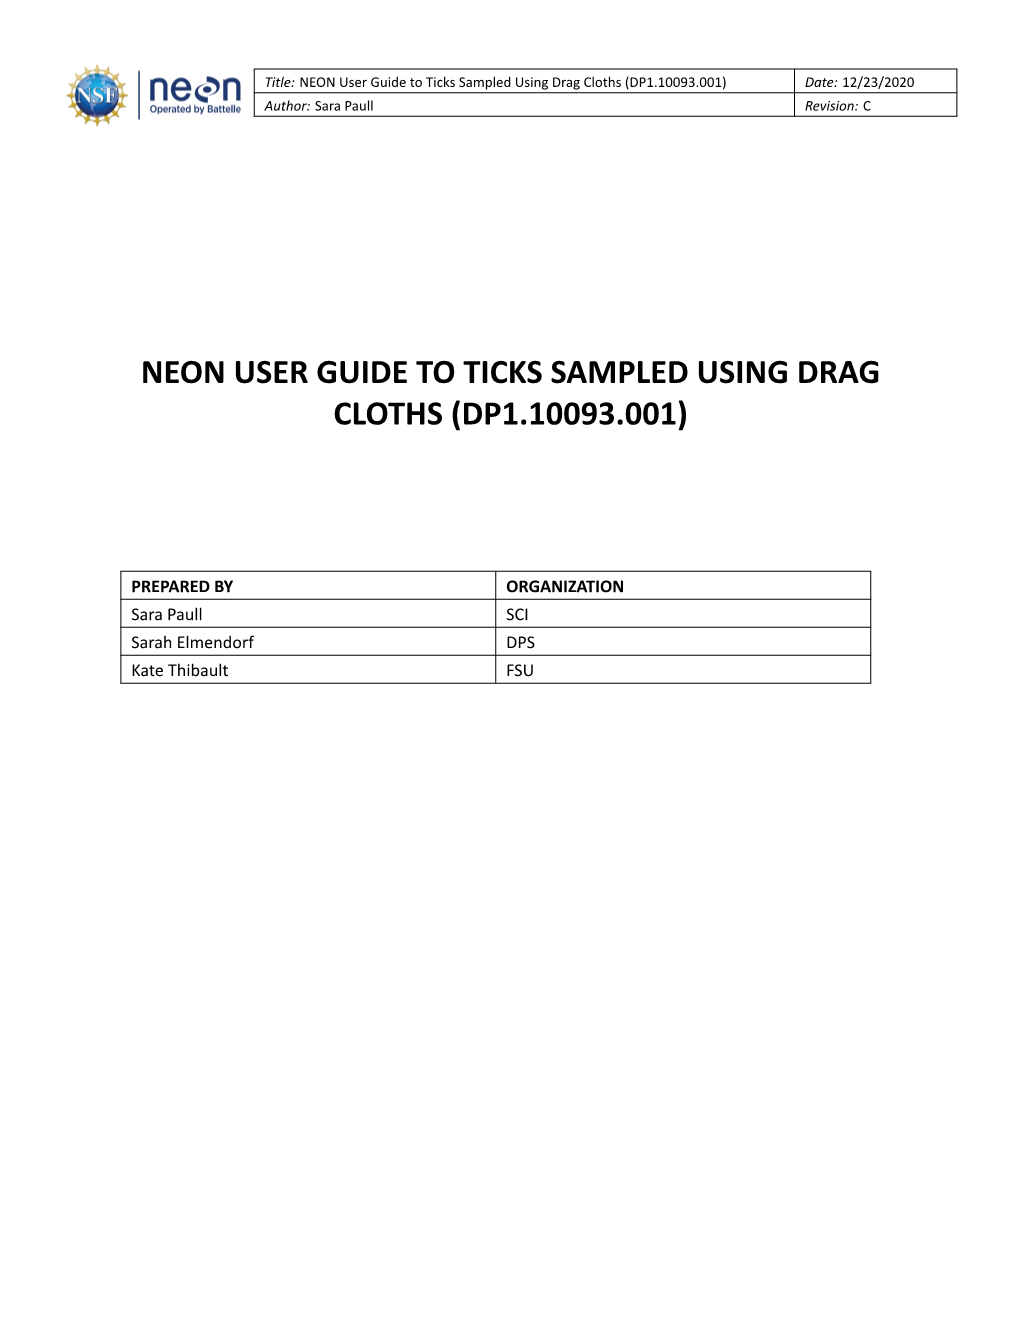 NEON User Guide to Ticks Sampled Using Drag Cloths (DP1.10093.001) Date: 12/23/2020 Author: Sara Paull Revision: C